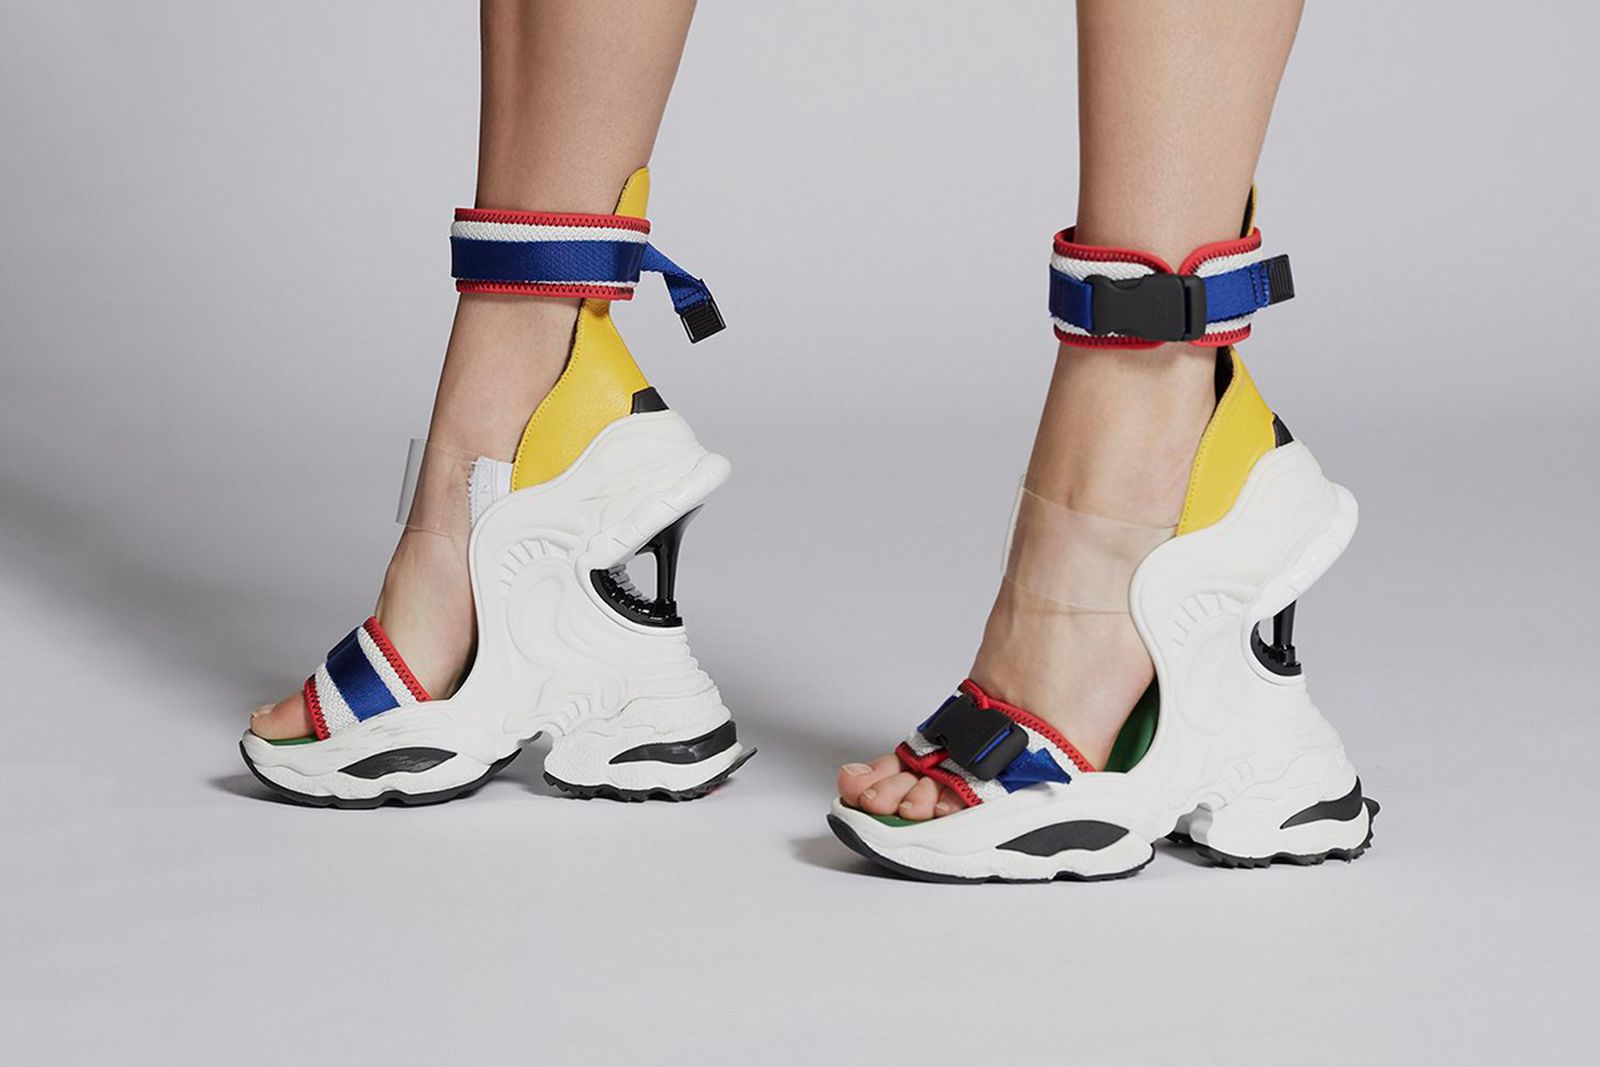 opzettelijk Snazzy Mam DSquared2's "The Giant" High-Heel Wedges Killed Dadcore